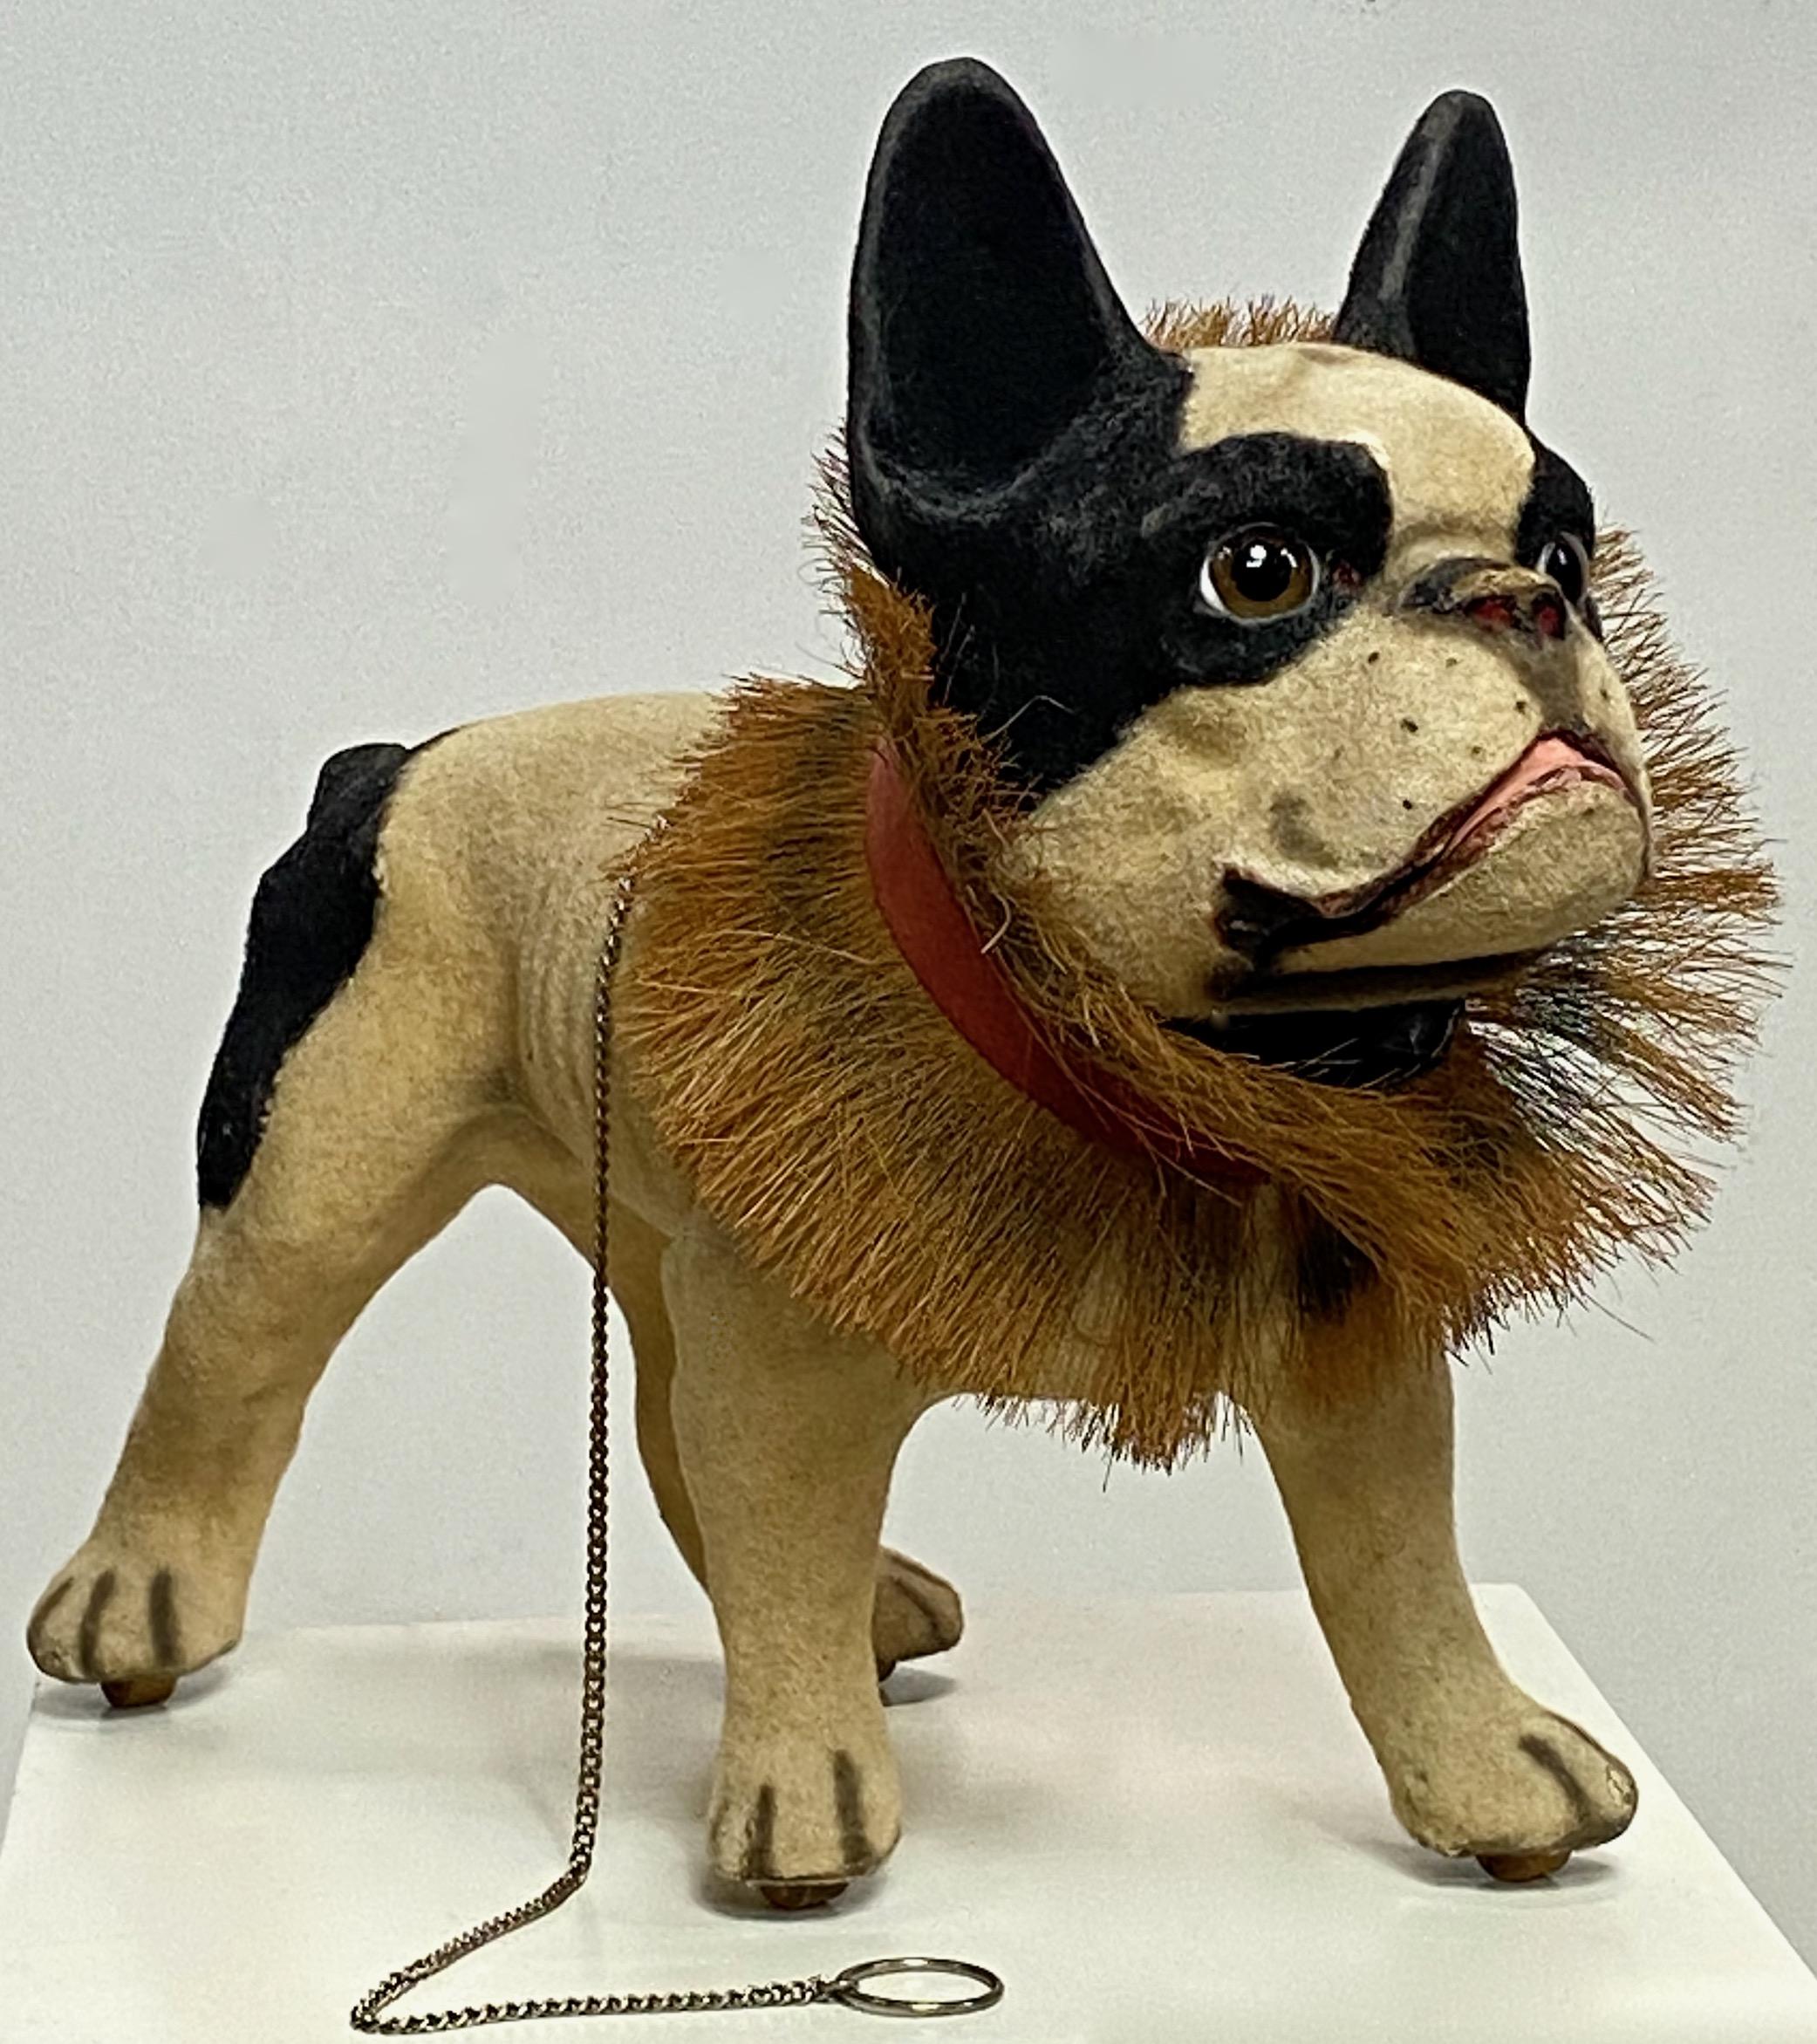 This charming original 19th century French Bulldog is a papier mache pull toy with a nodding head and a small pull chain to enable the barking.
In remarkable well cared for condition, having very minor signs of use and age.